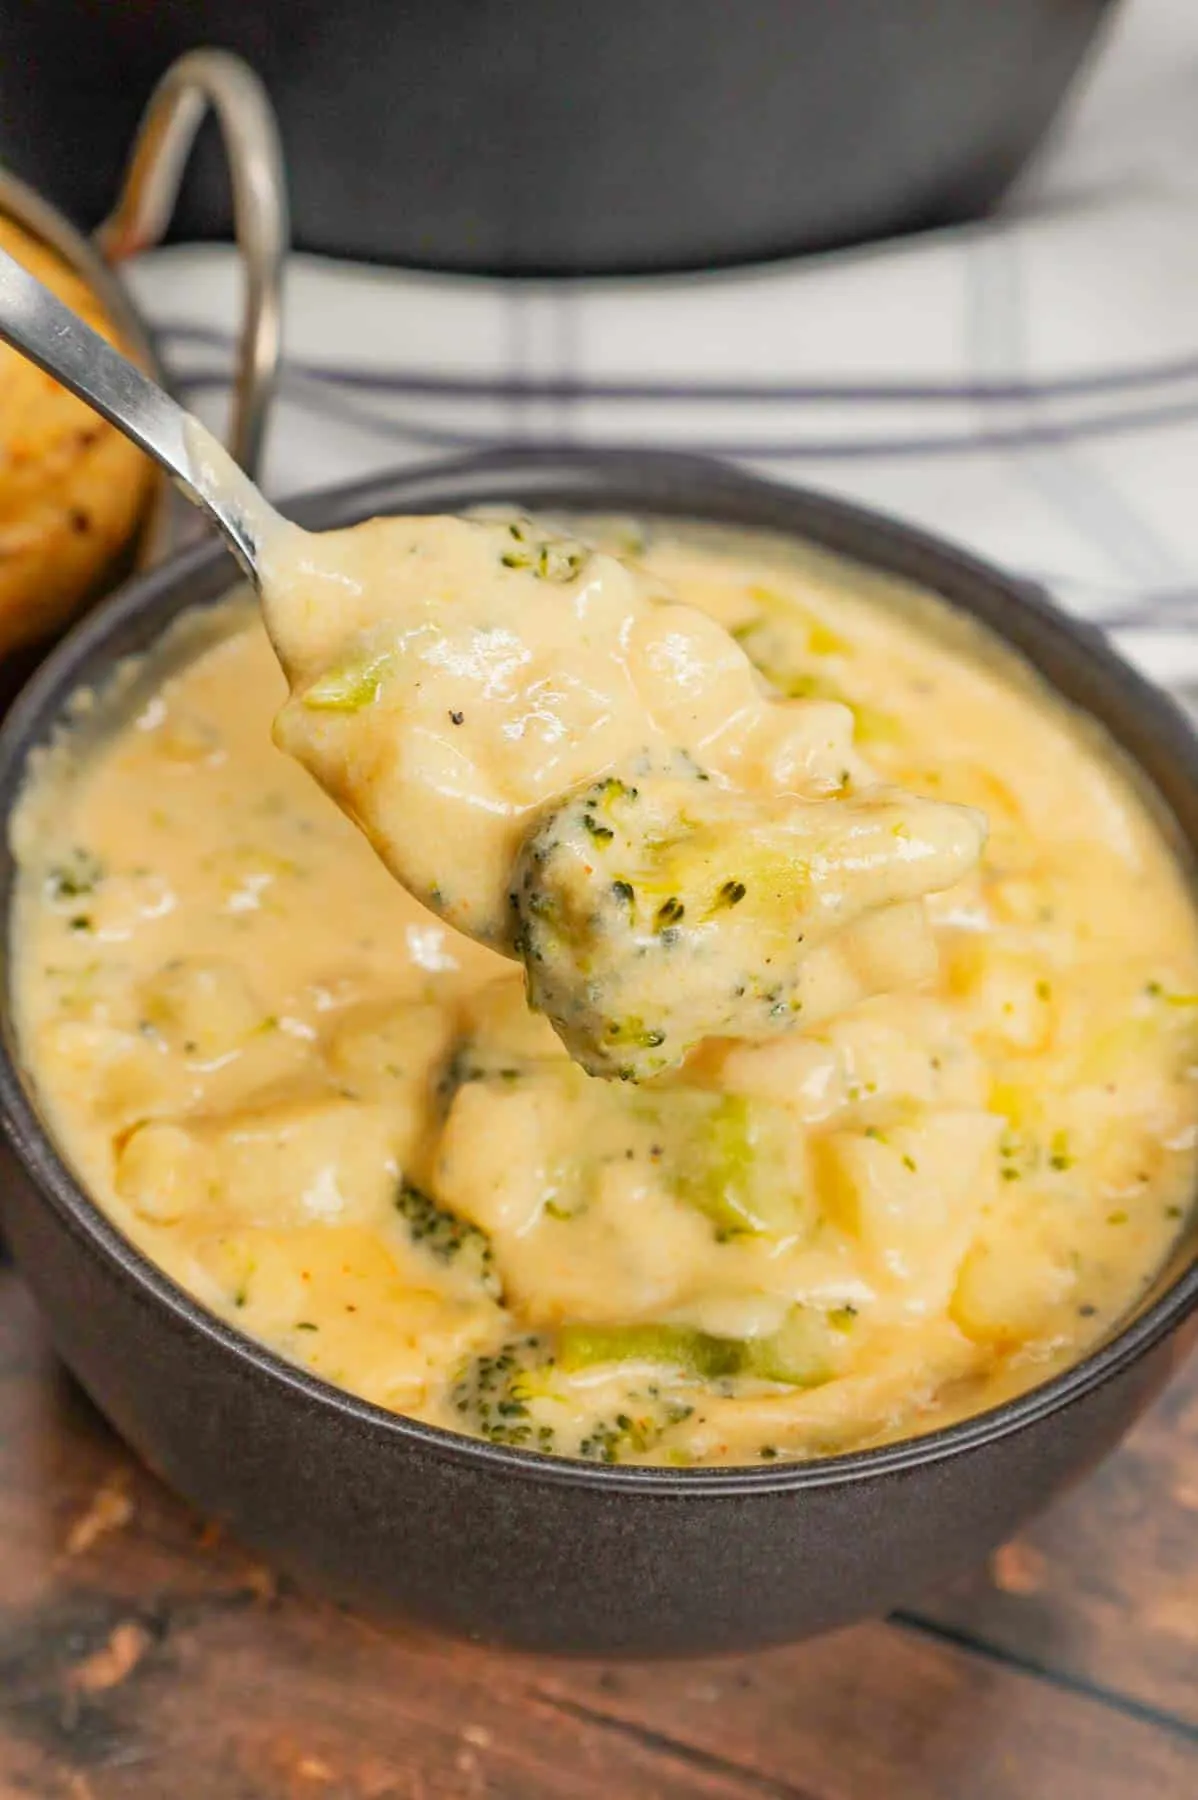 Broccoli Potato Soup is a hearty soup recipe loaded with diced hash brown potatoes, broccoli florets, cheddar cheese and instant mashed potatoes.